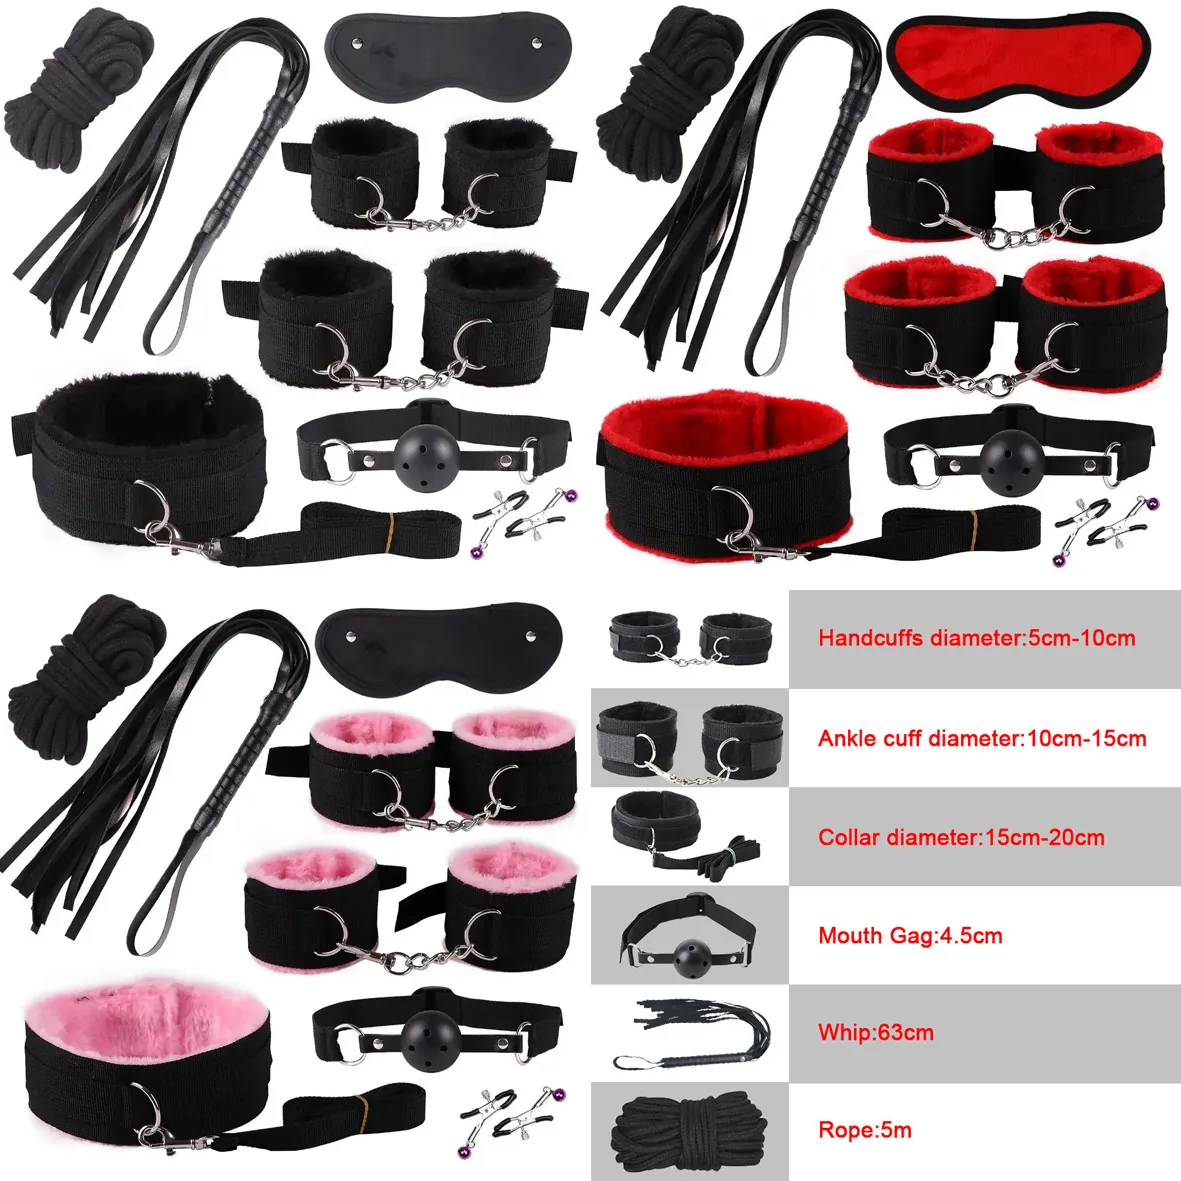 Black Pink 8Pcs BDSM Kits sexy Products Erotic Toy Adults Bondage Set Handcuffs Nipple Clamps Gag Whip Rope Toys For Couples